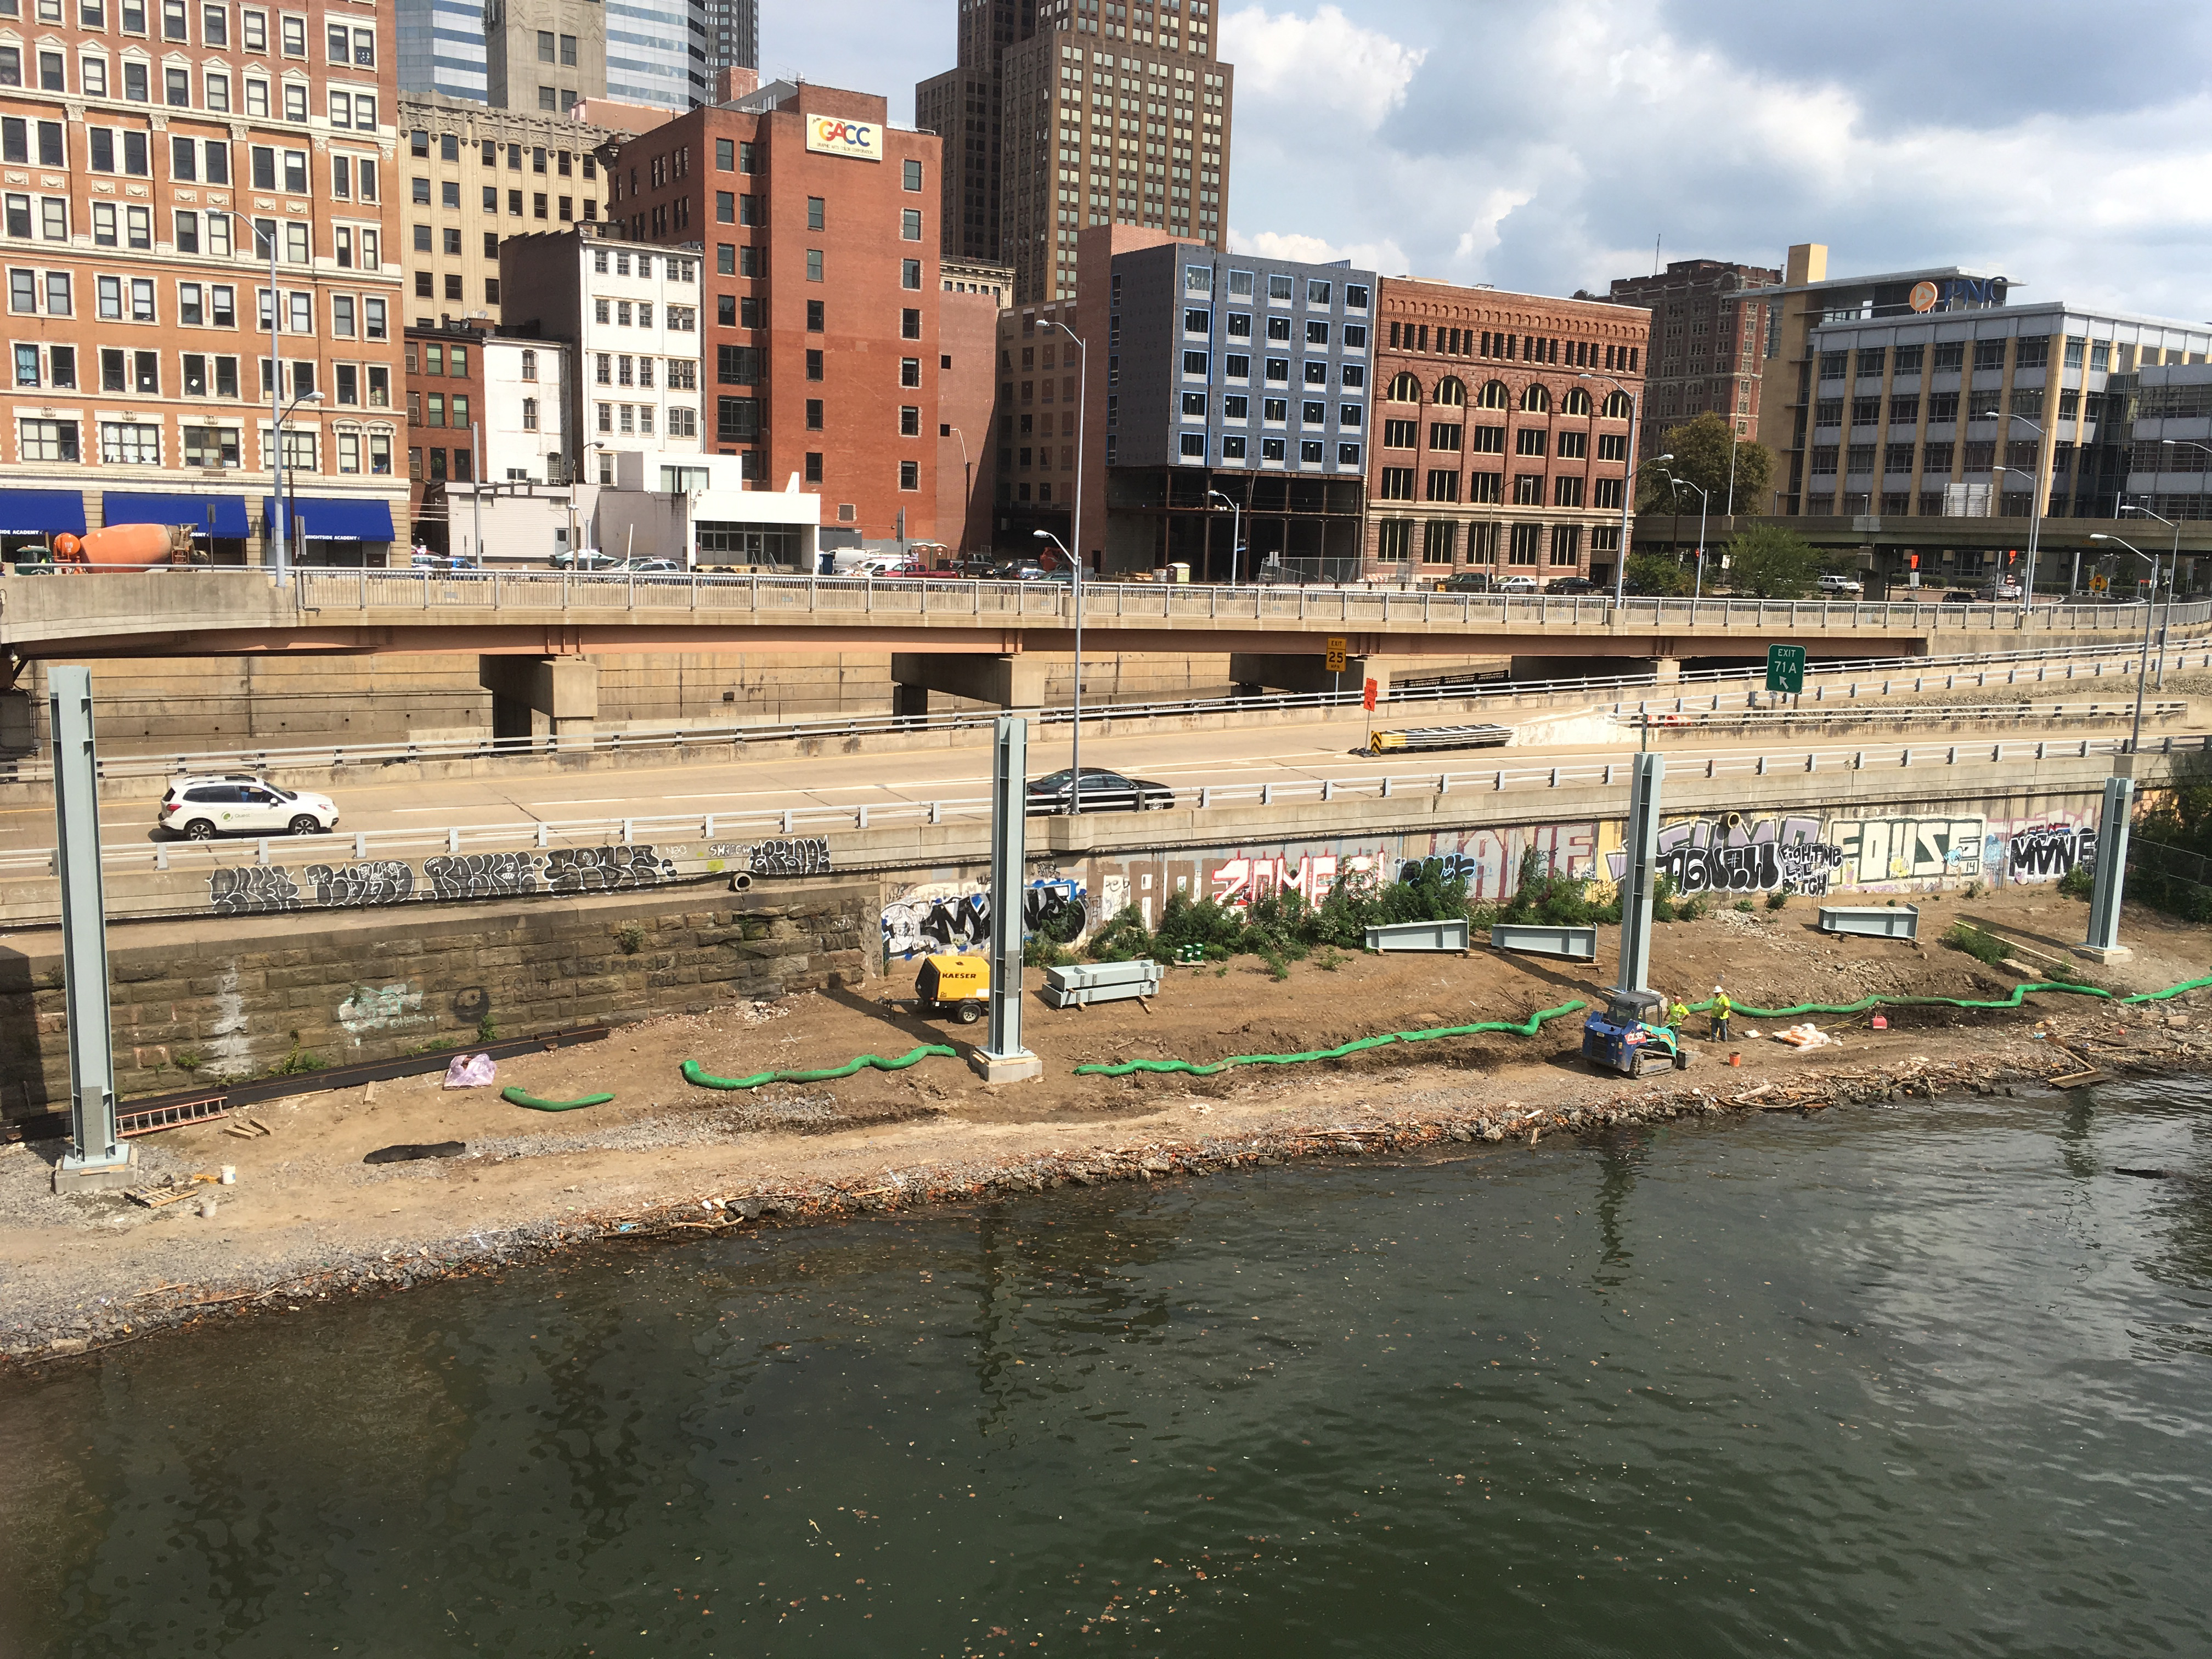 Steel supports are put into place at the Mon Wharf site. These four beams will support the portion of the ramp that extends upstream of the Smithfield Street Bridge before it doubles back downstream.